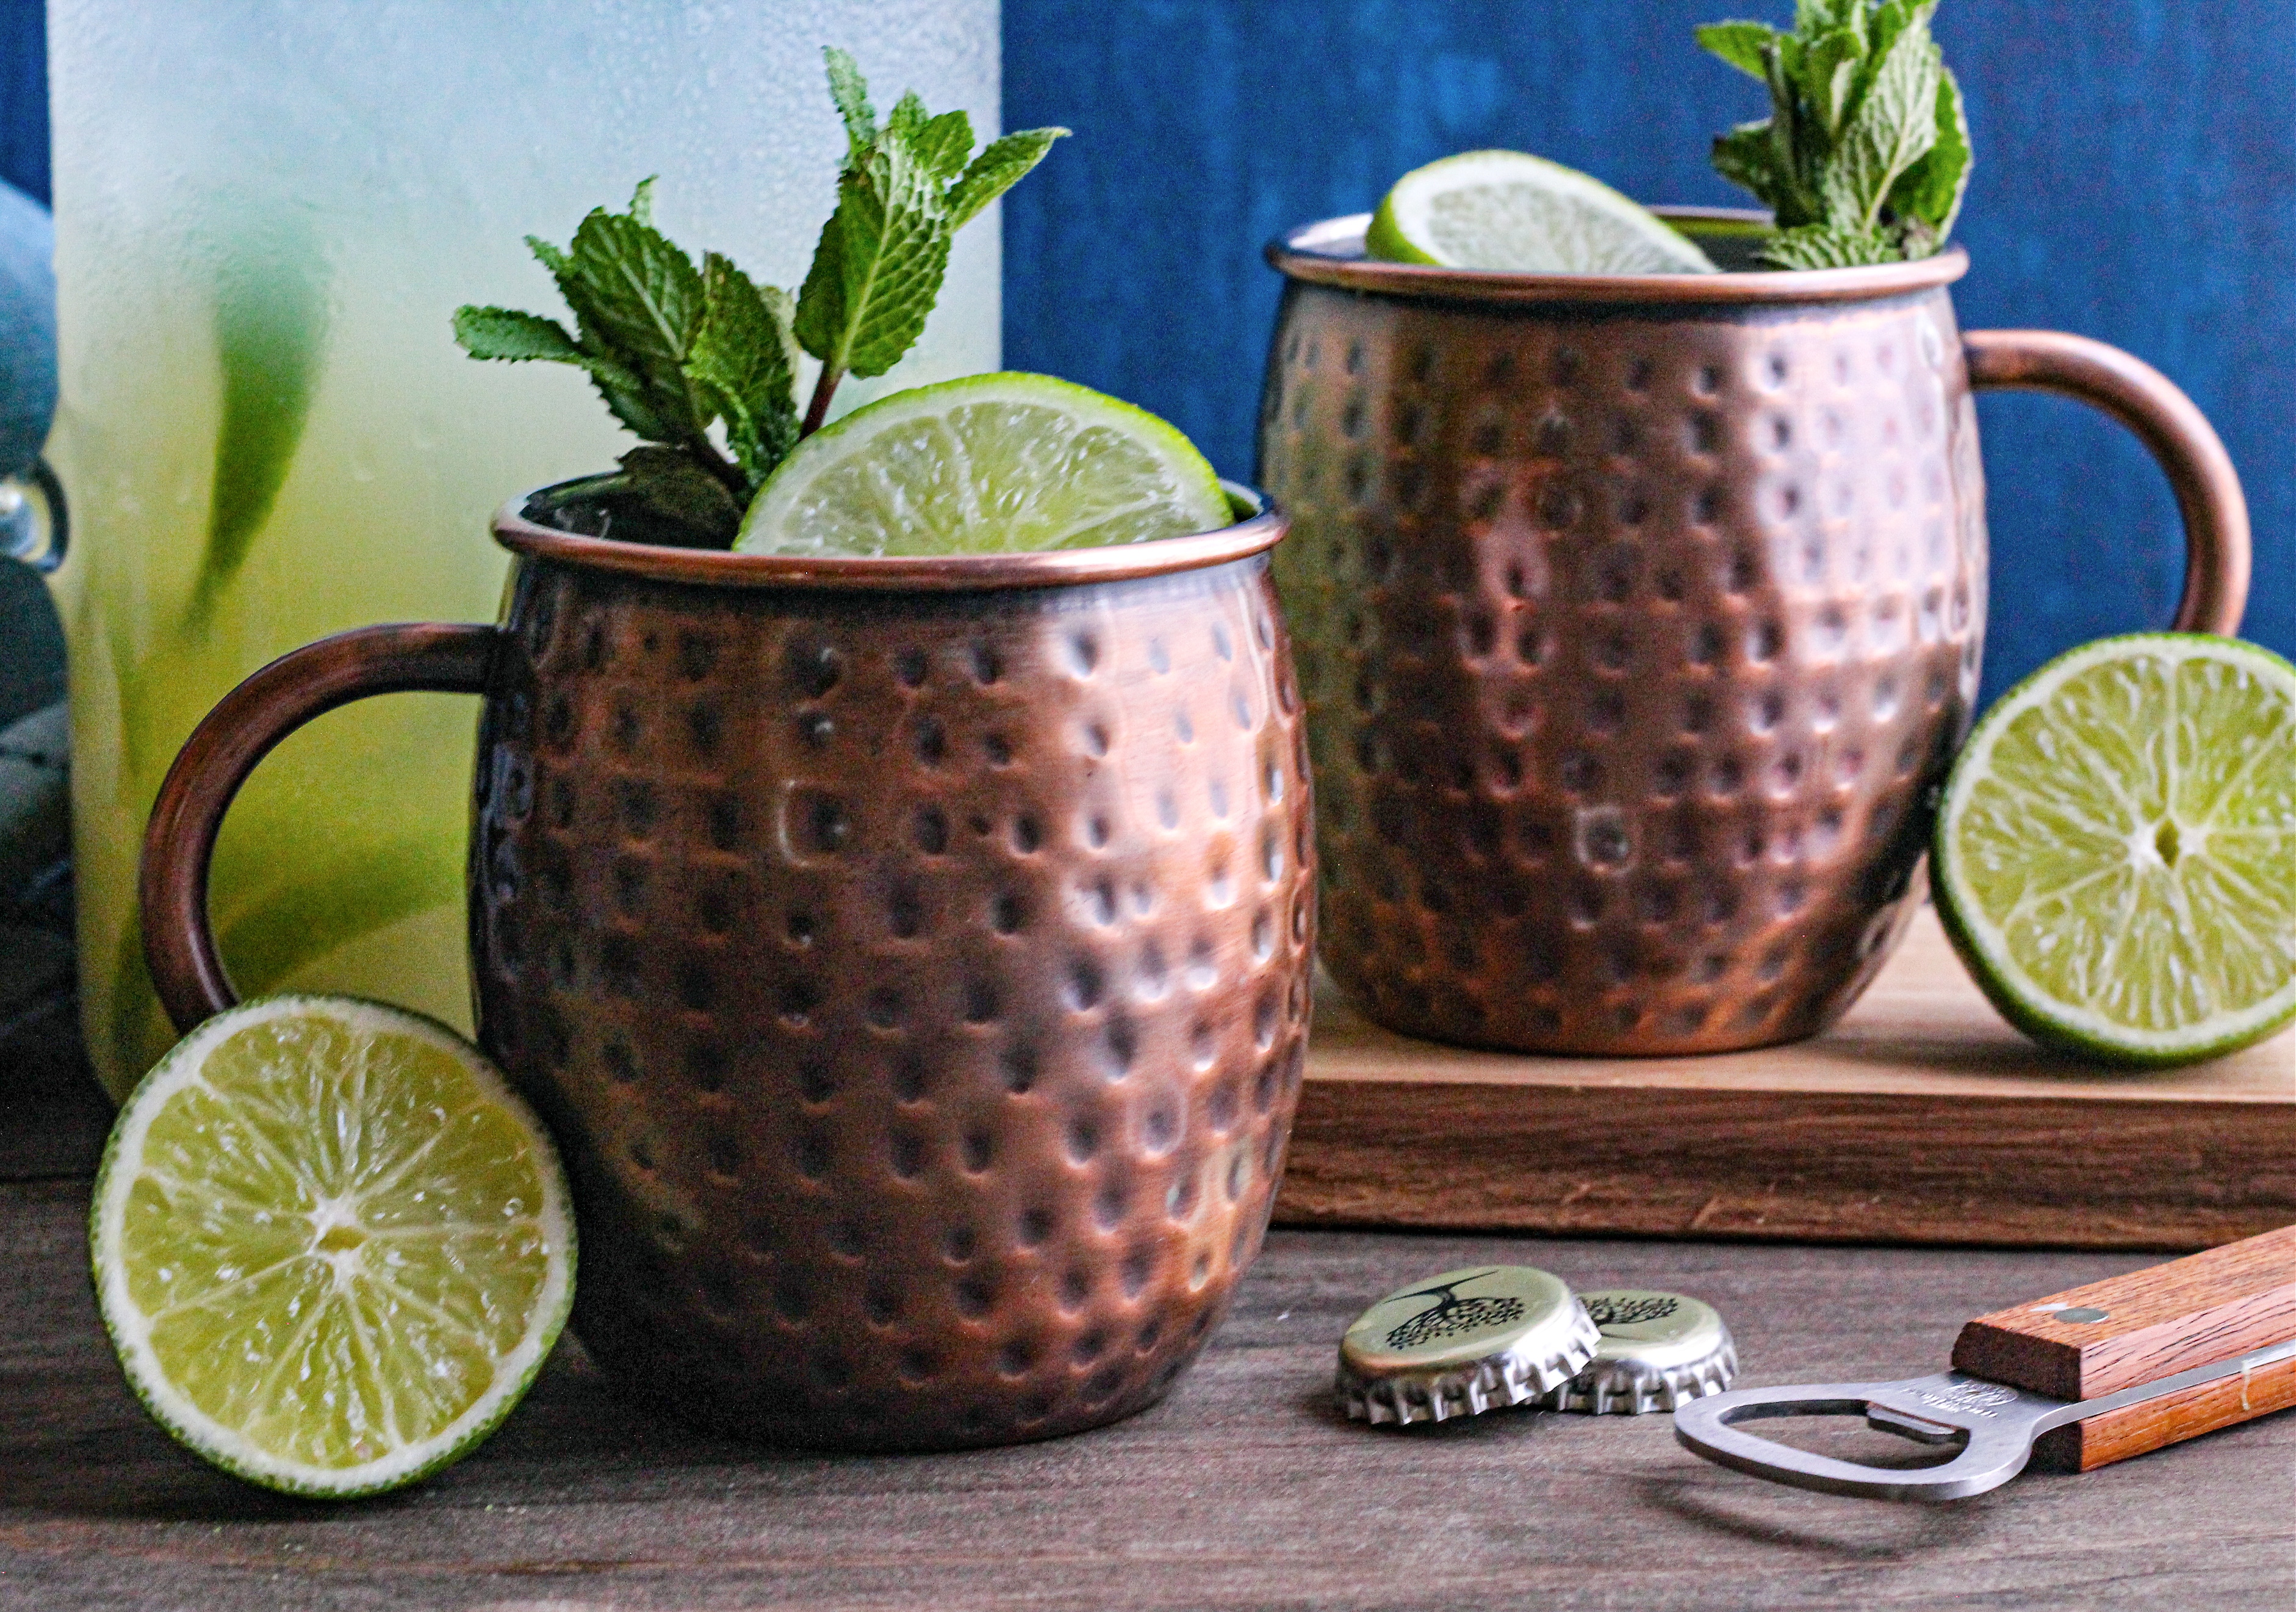 Two Moscow Mules in copper mugs garnished with limes and mint.